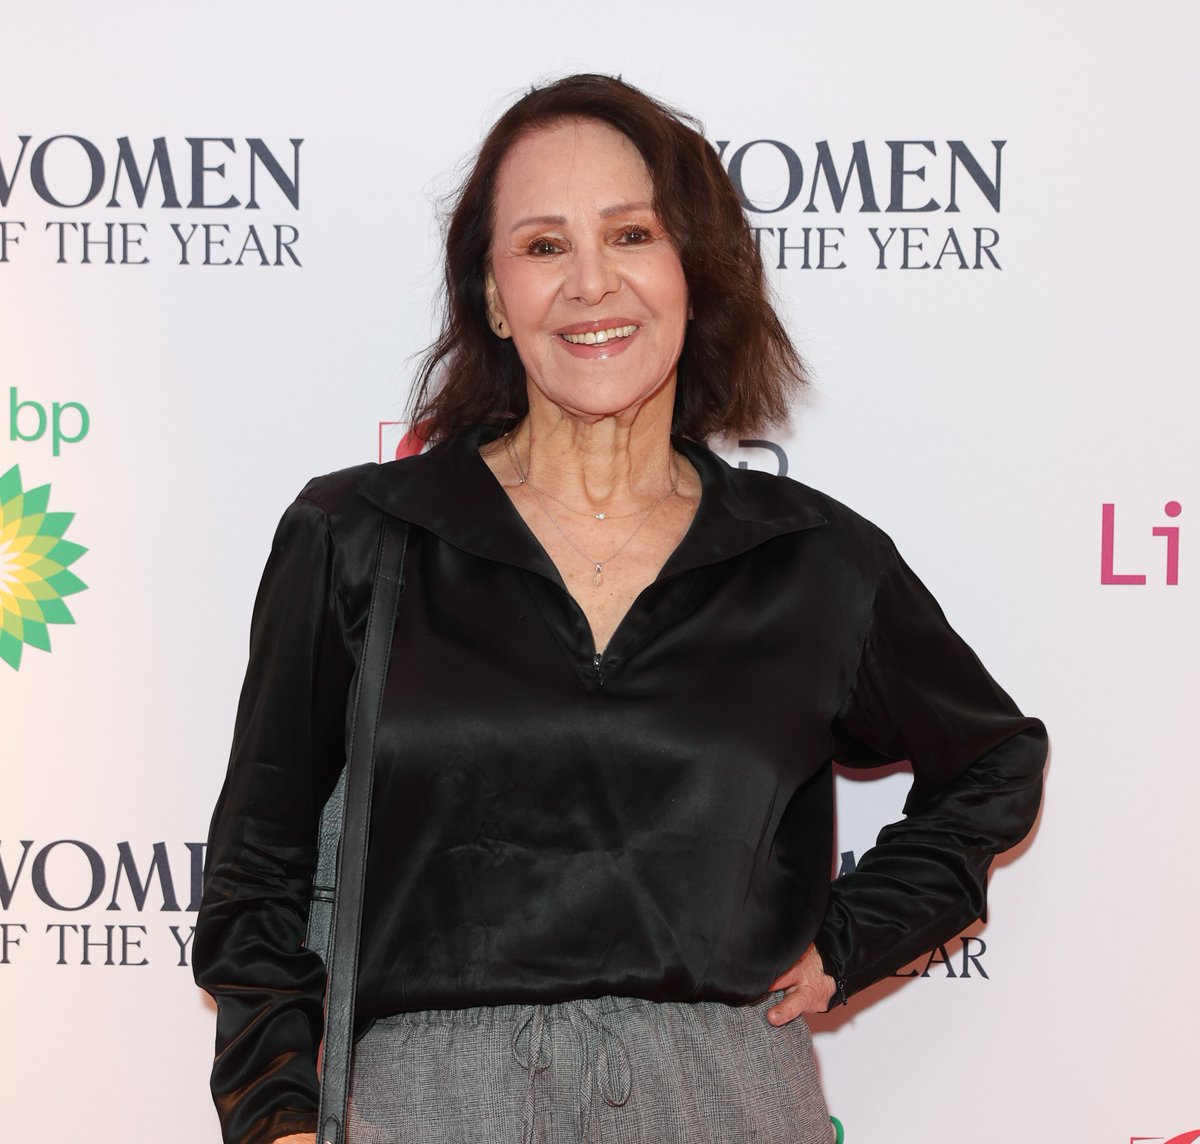 Bravo, Dame Arlene Phillips, on clinching the Best Theatre Choreographer at this year's Olivier Awards! Your win is a testament to your unparalleled talent and dedication to the art of dance. We're absolutely thrilled to have you grace our Nominating Council with your expertise🌟